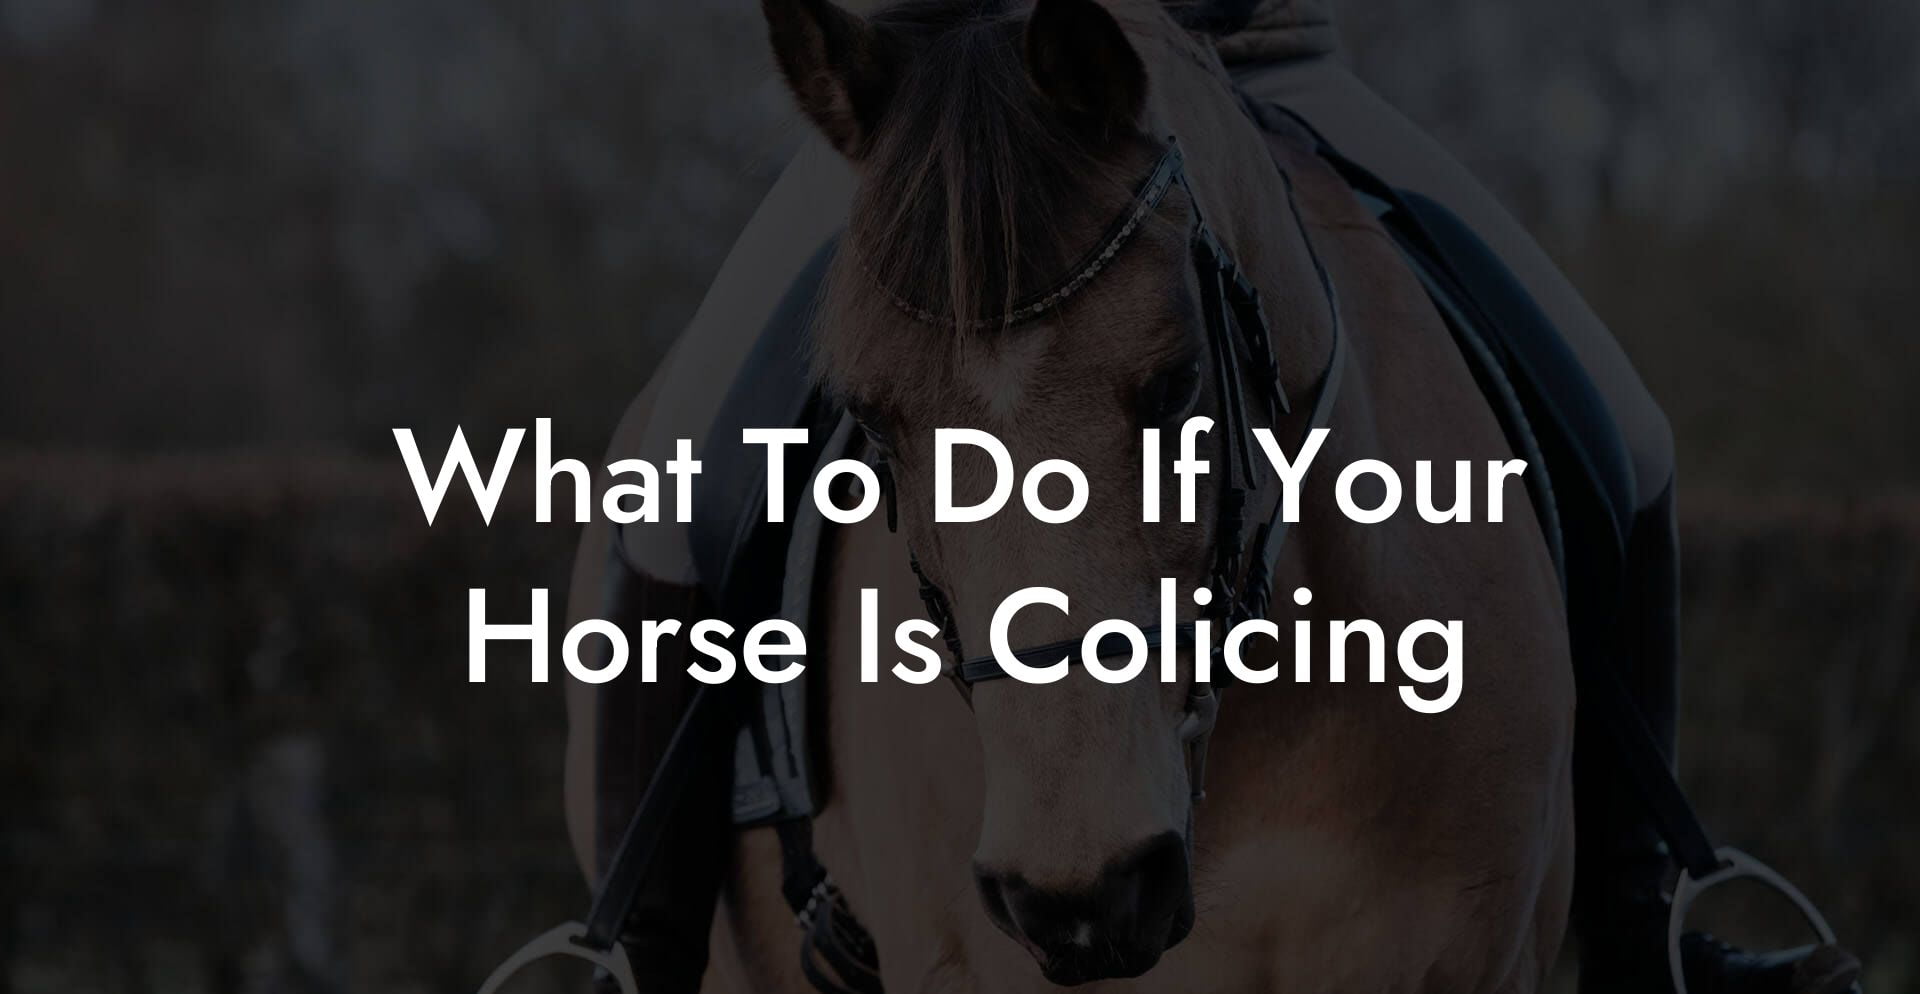 What To Do If Your Horse Is Colicing